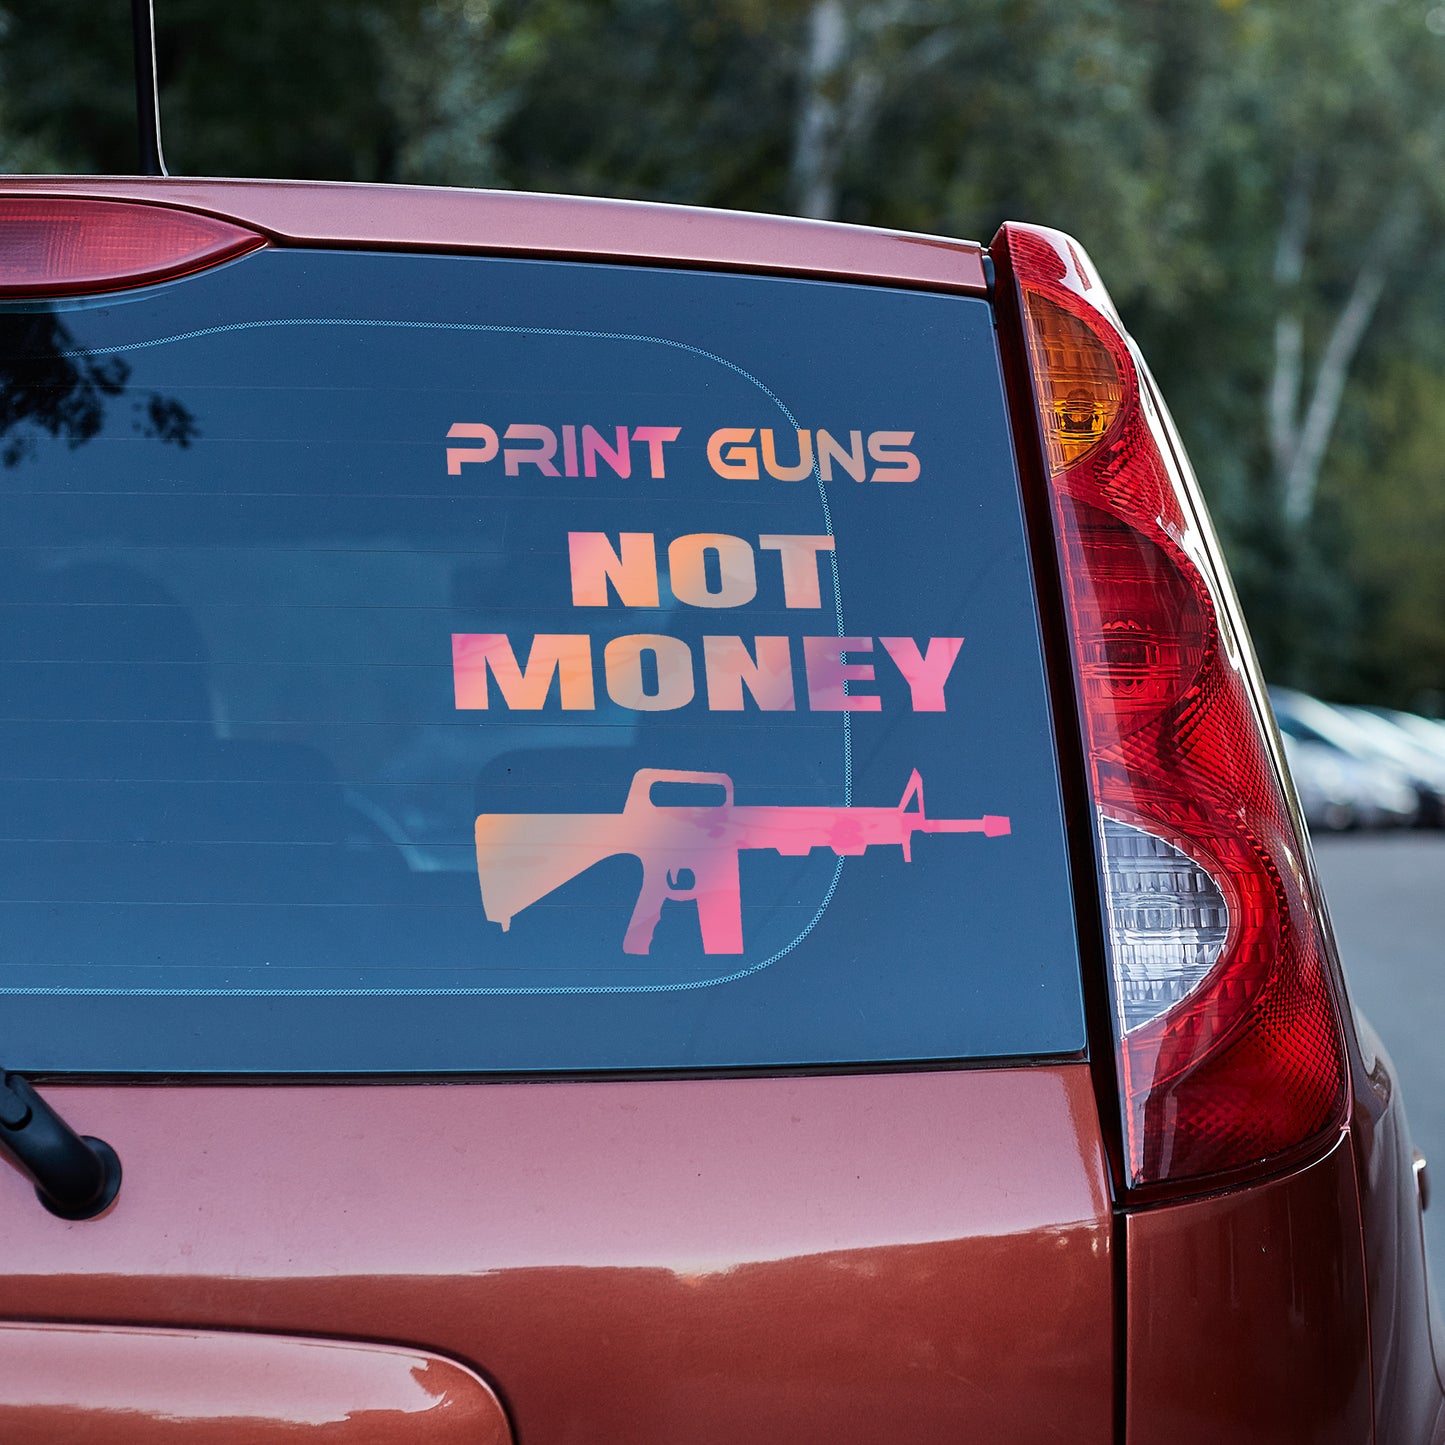 Print guns not money vinyl decal bumper humper decal stickers Decals for cars Decals for Trucks decals for tumblers liberty minivan sticker SUV decals tailgater truck decals window decal car Window decals window decor